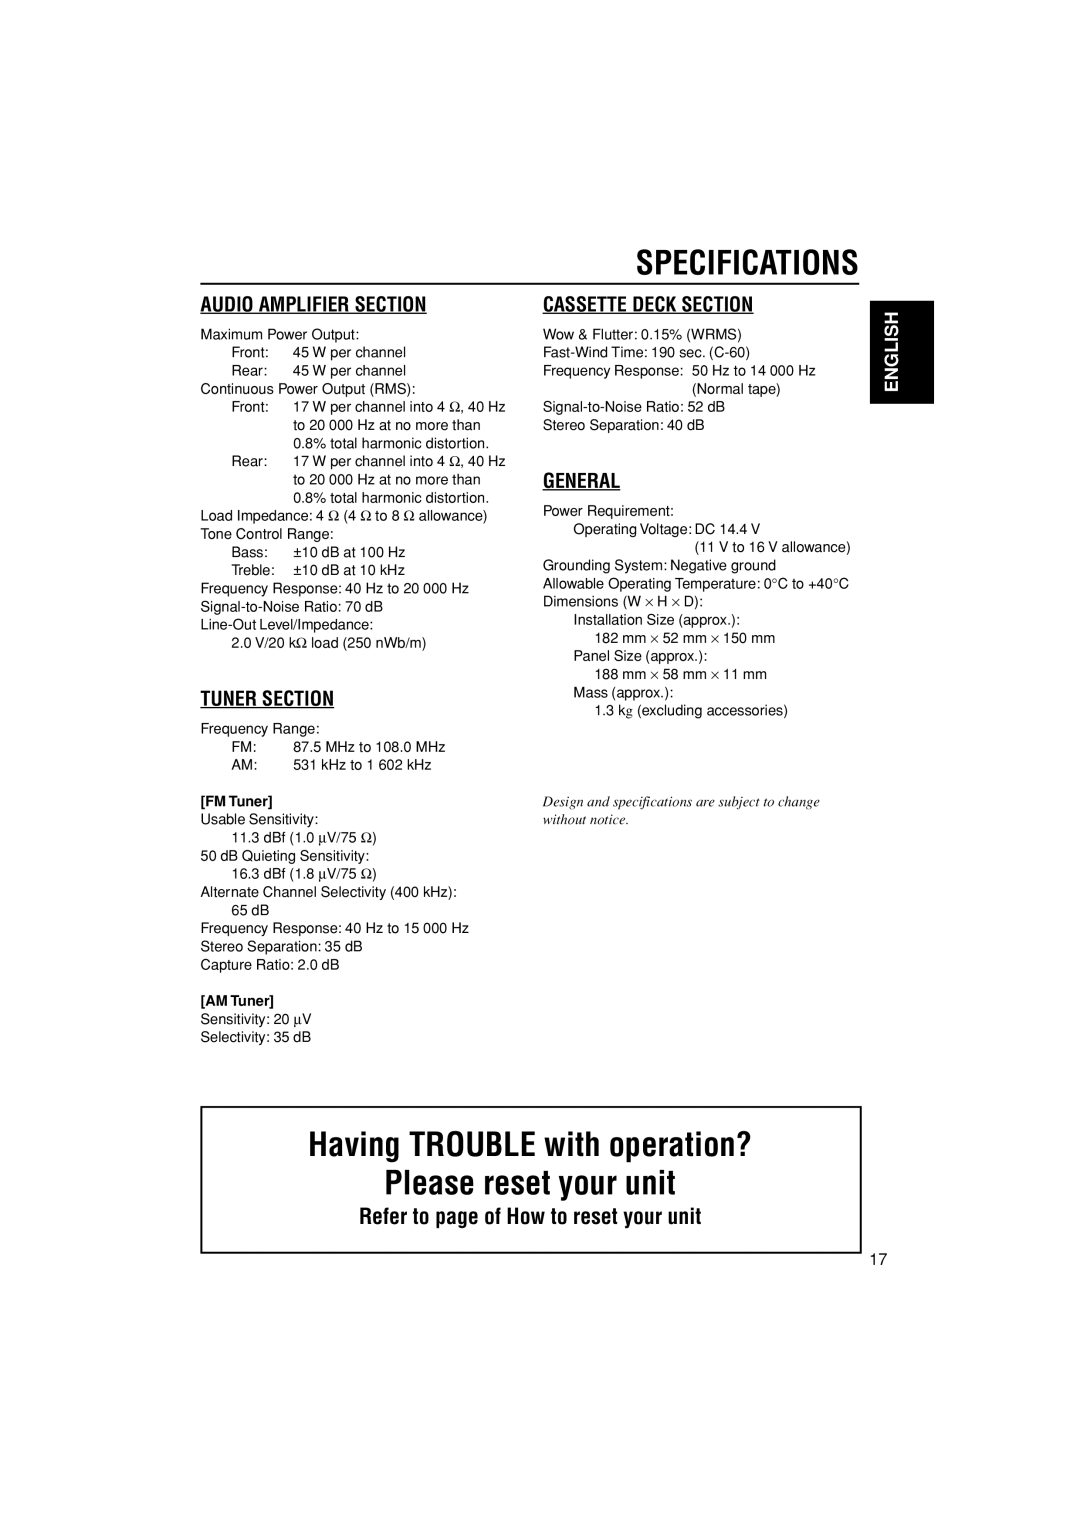 JVC KS-FX385 Specifications, Having TROUBLE with operation? Please reset your unit, Audio Amplifier Section, Tuner Section 